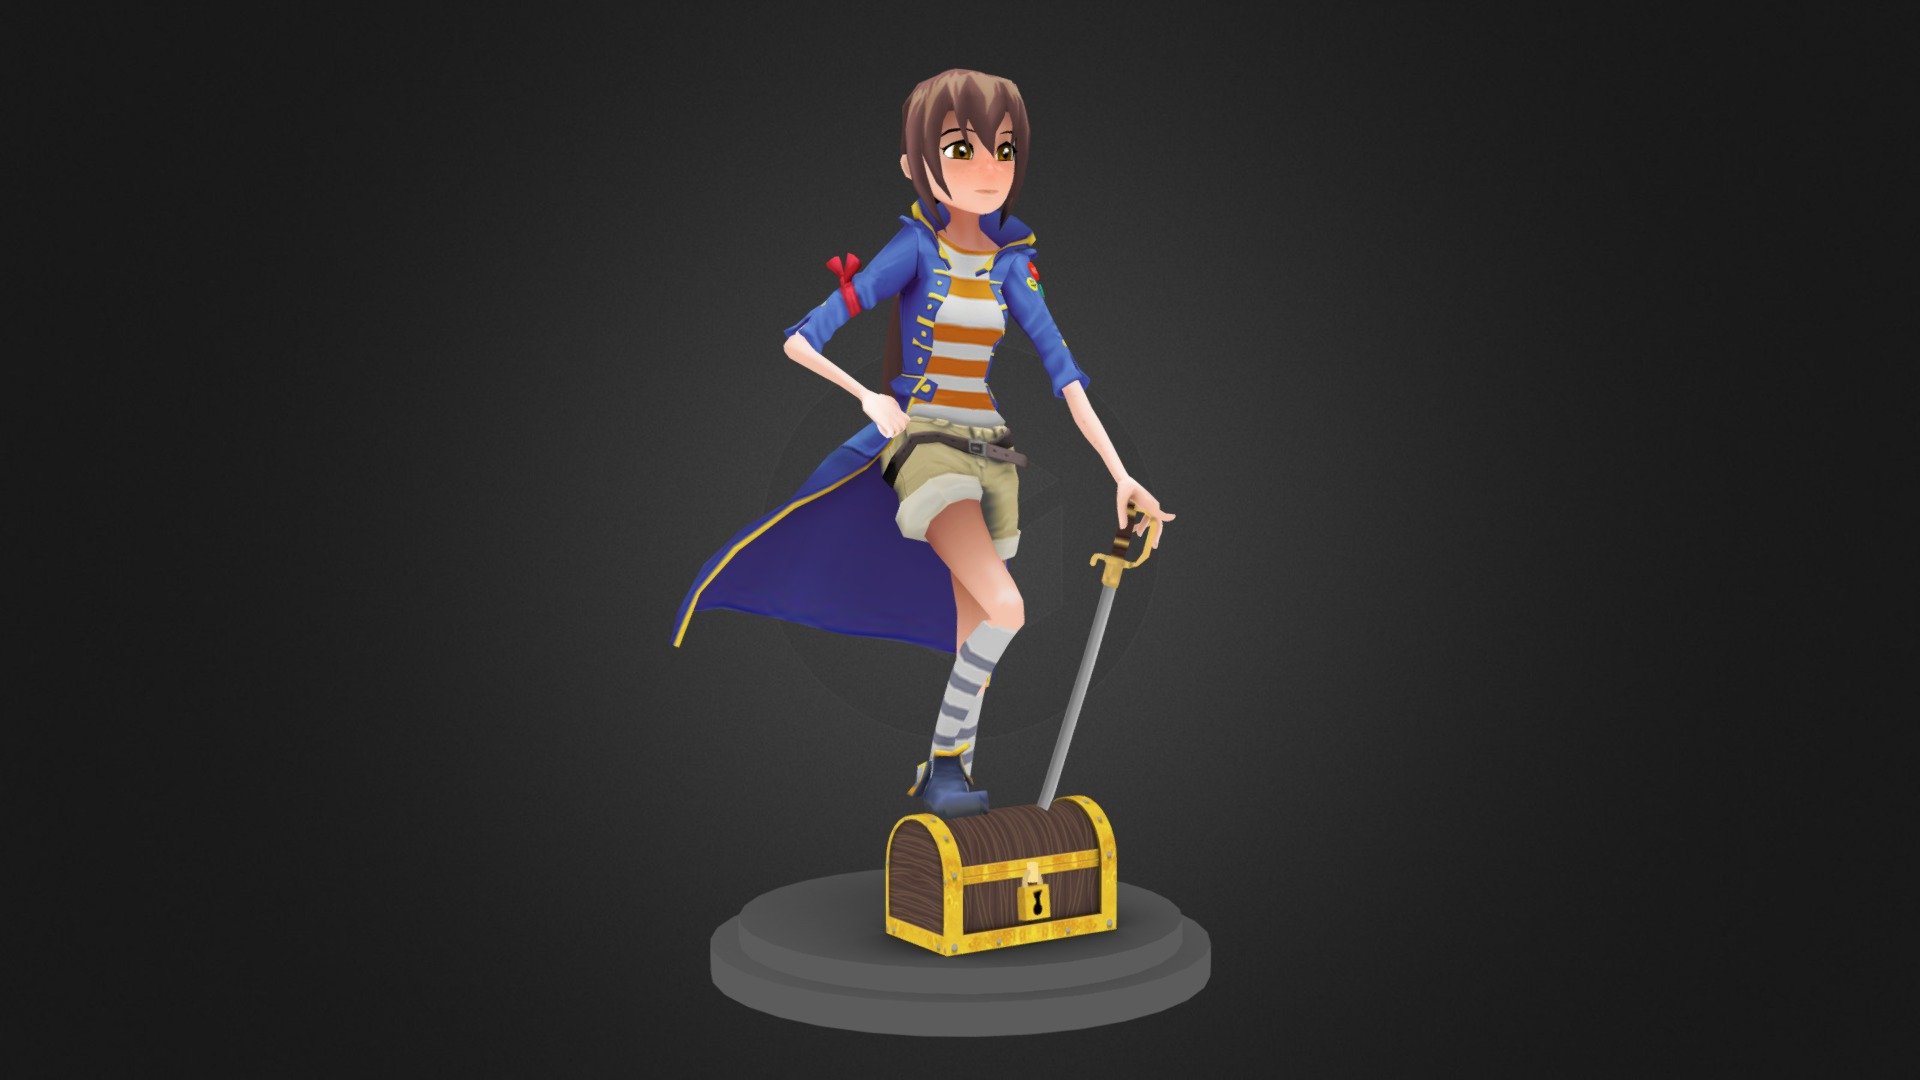 A personal project learning how to texture paint.

Discussion thread and download link: http://blenderartists.org/forum/showthread.php?336018-PIRATE-GIRL-Low-Poly-Character-for-Game-Engine-(download-included) - Pirate Girl - 3D model by pancake_manicure 3d model